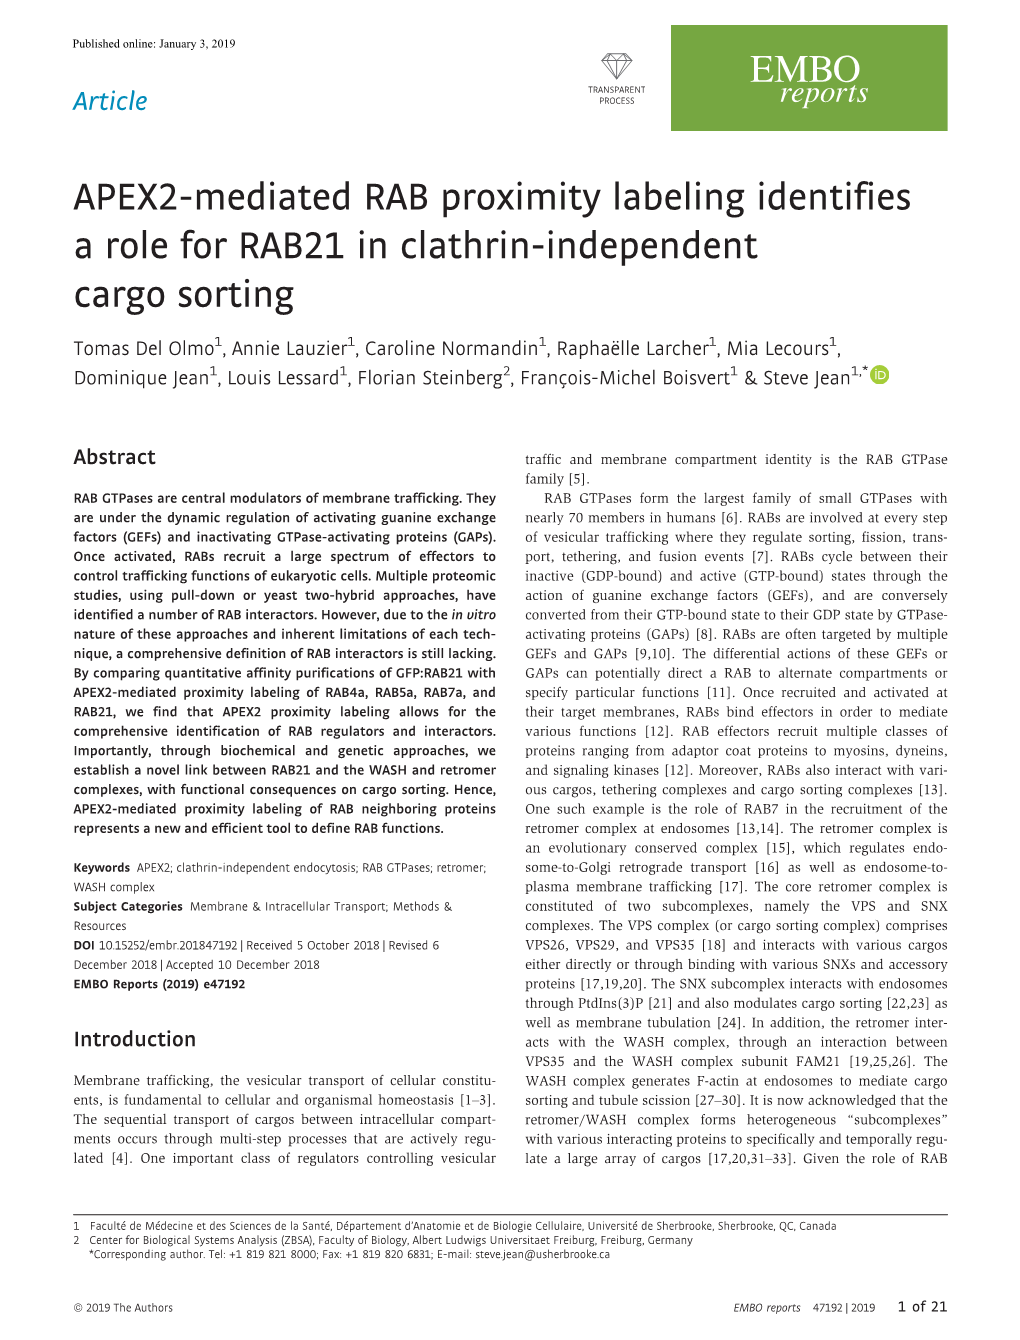 APEX2‐Mediated RAB Proximity Labeling Identifies a Role for RAB21